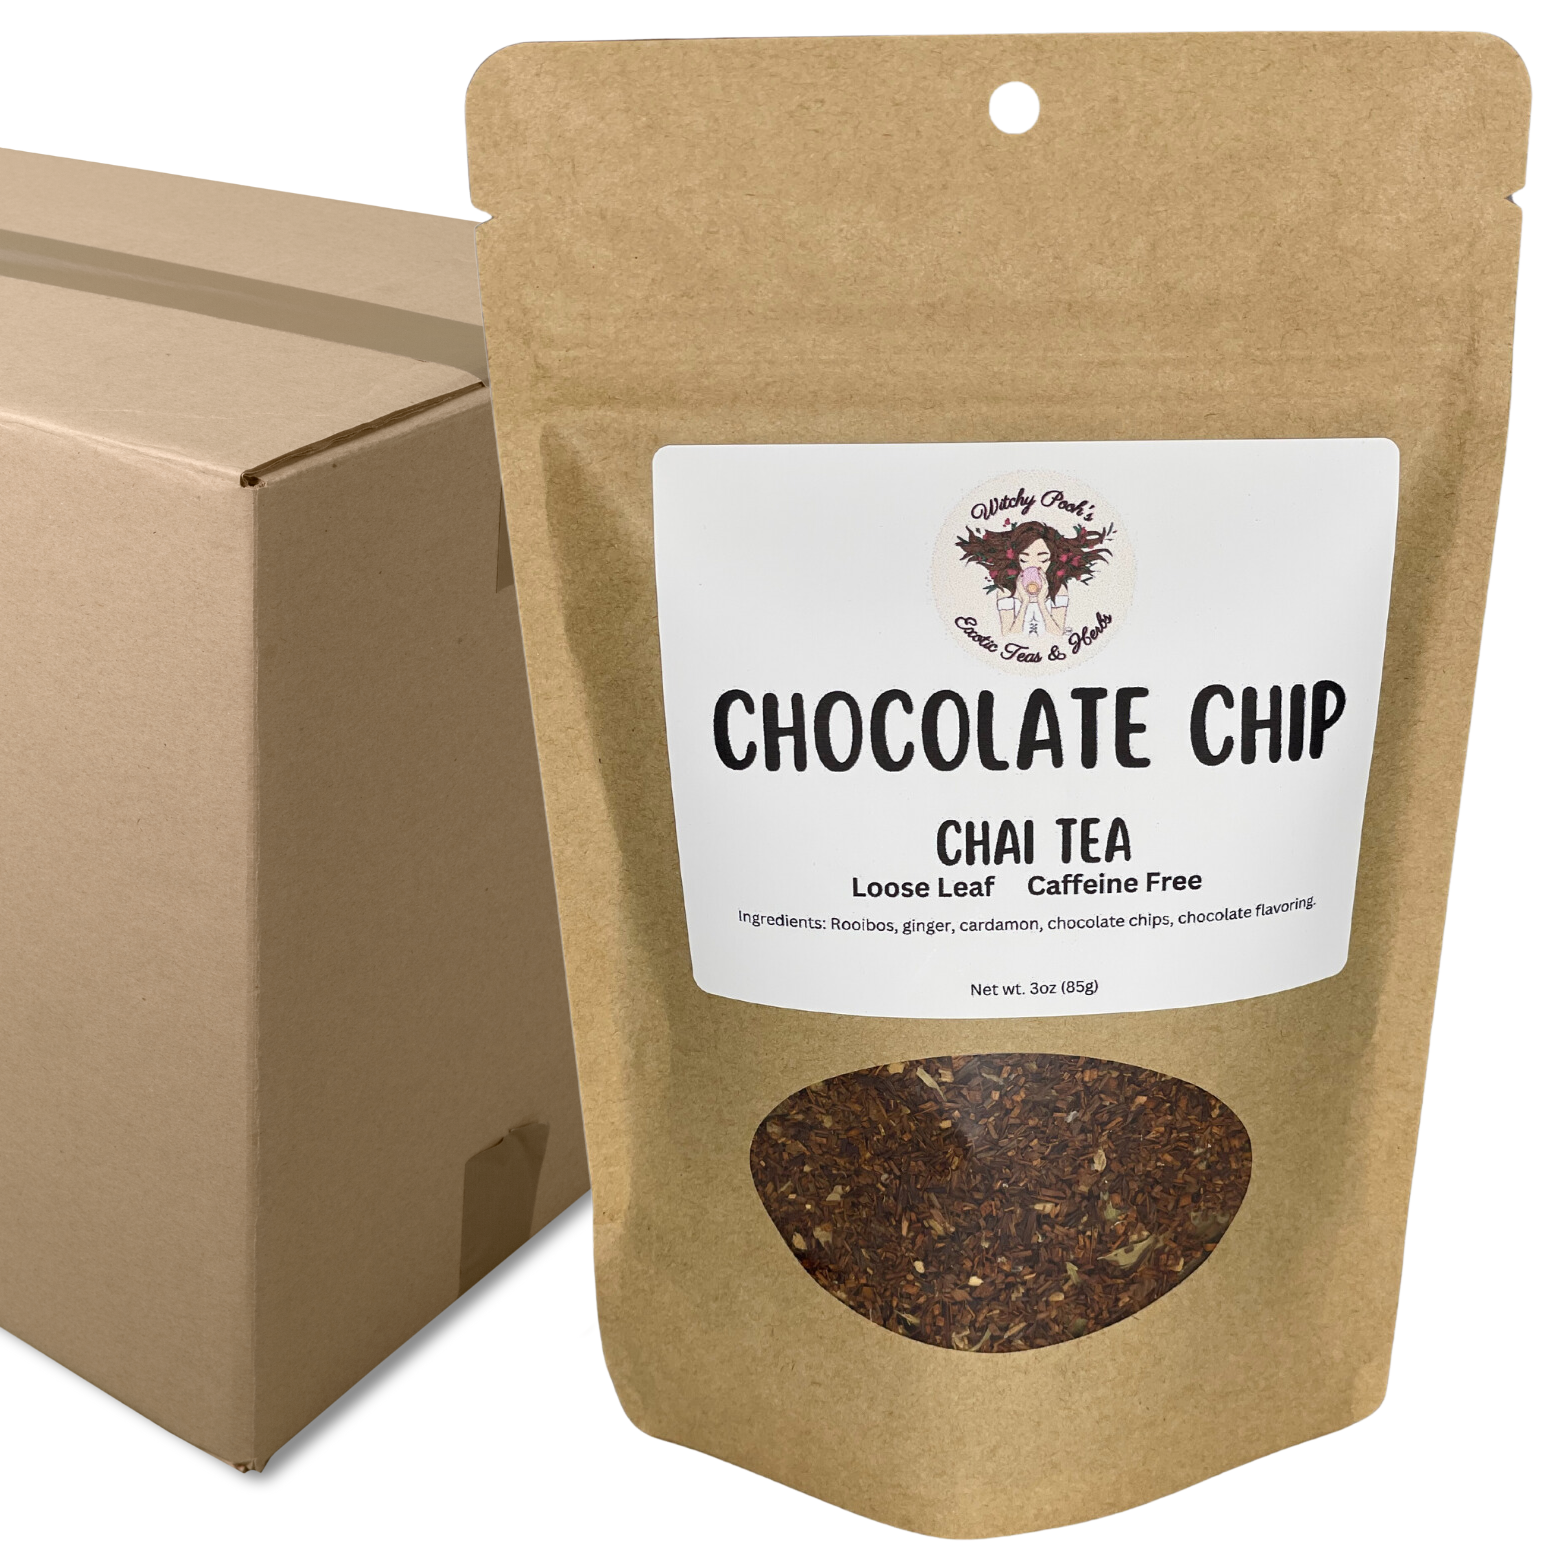 Witchy Pooh's Chocolate Chip Chai Loose Leaf Rooibos Herbal Tea with Real Chocolate Chips!-19